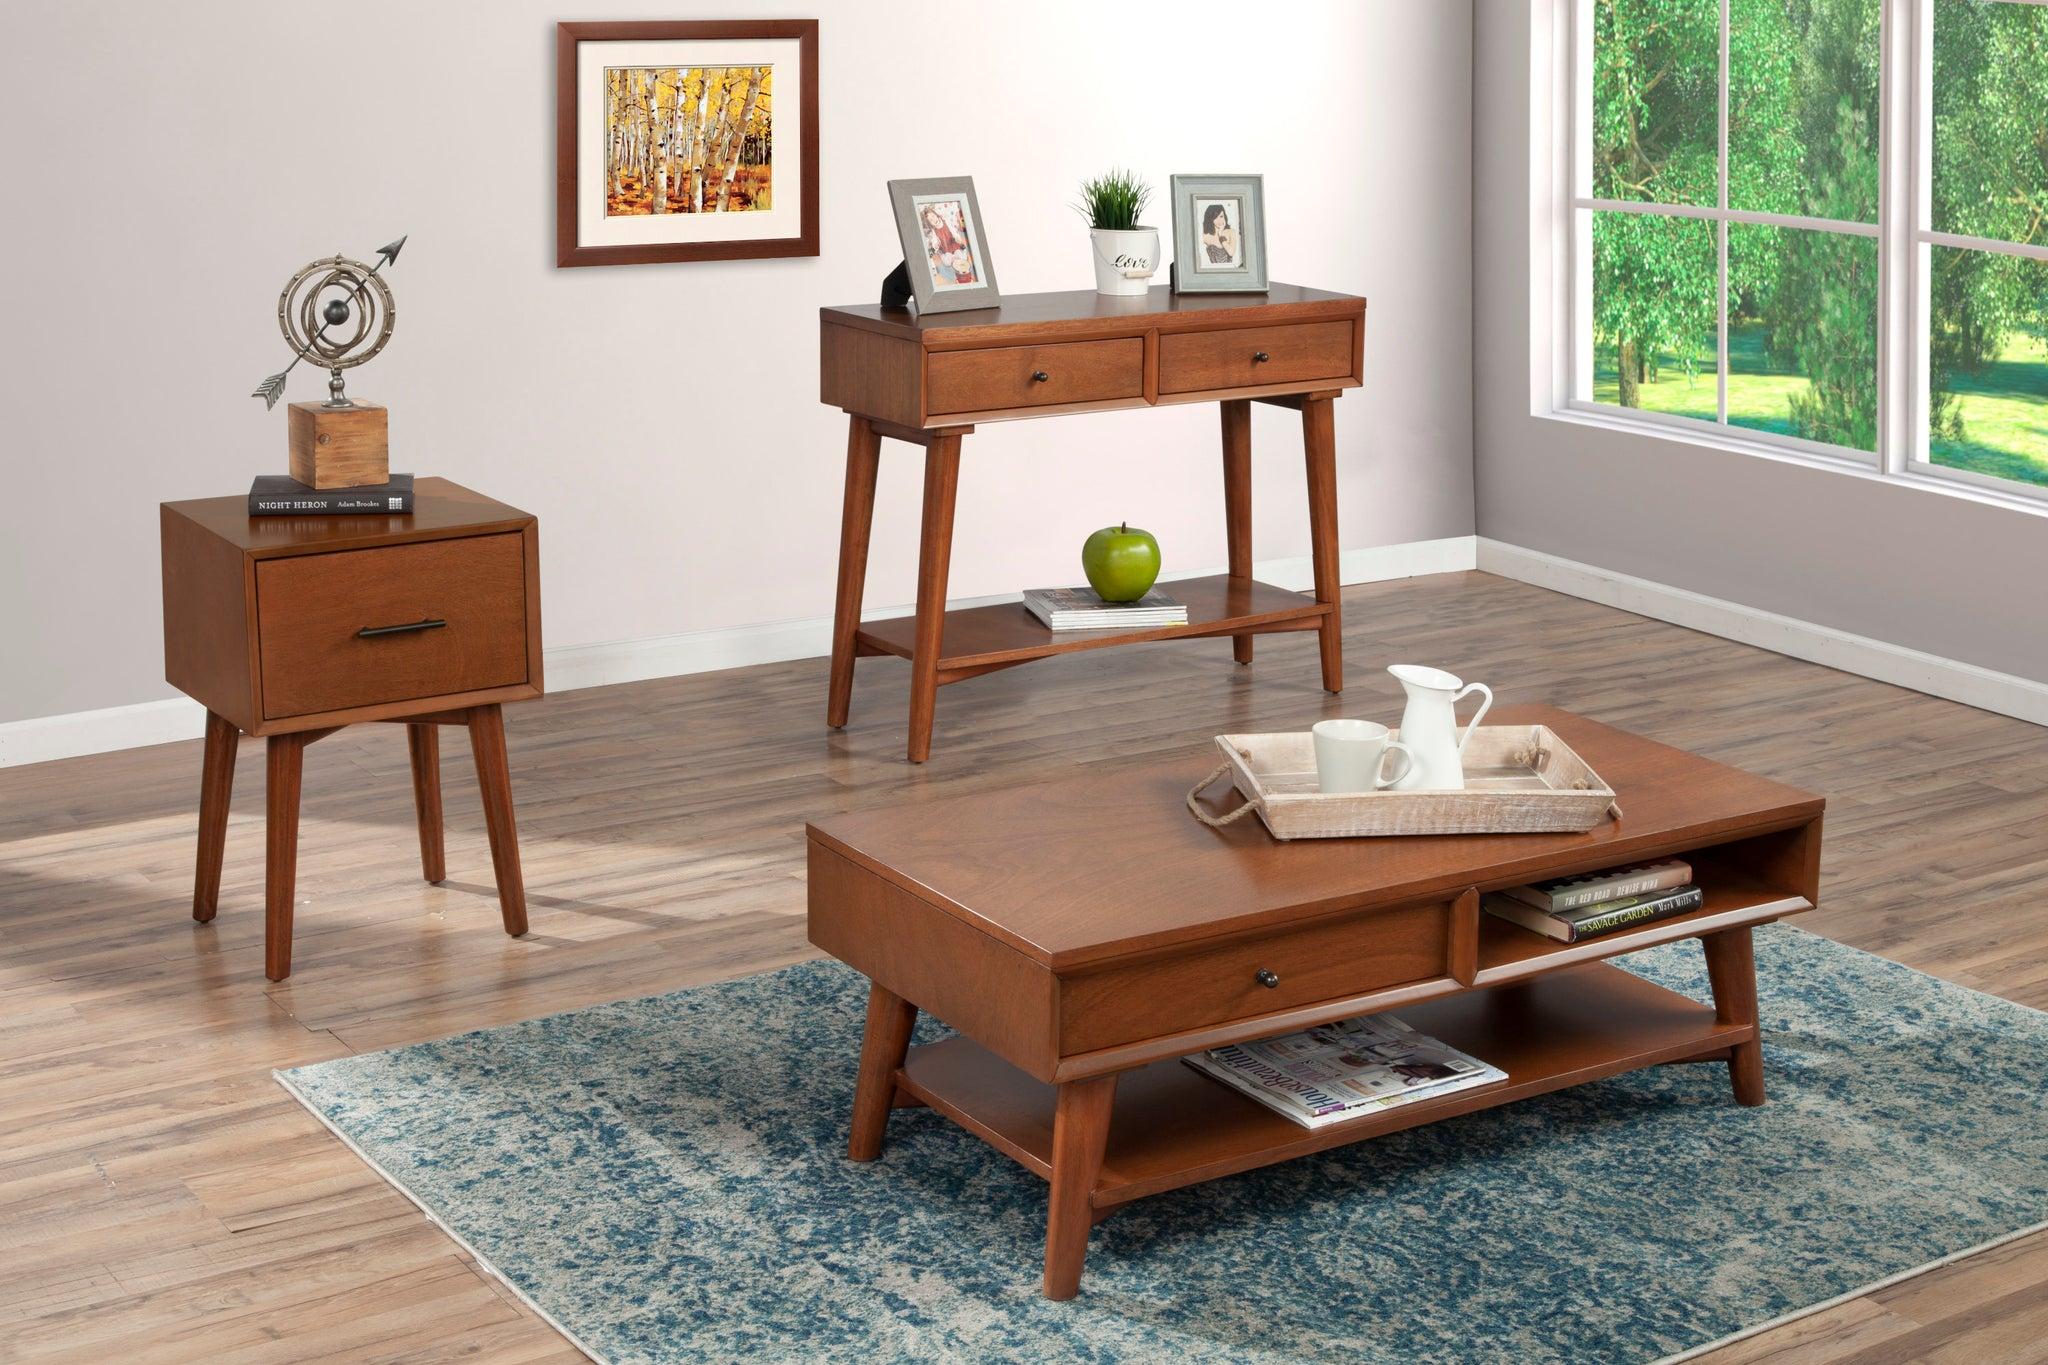 Contemporary, Modern Coffee Table Set Flynn 966-61-Set-3 in Brown 